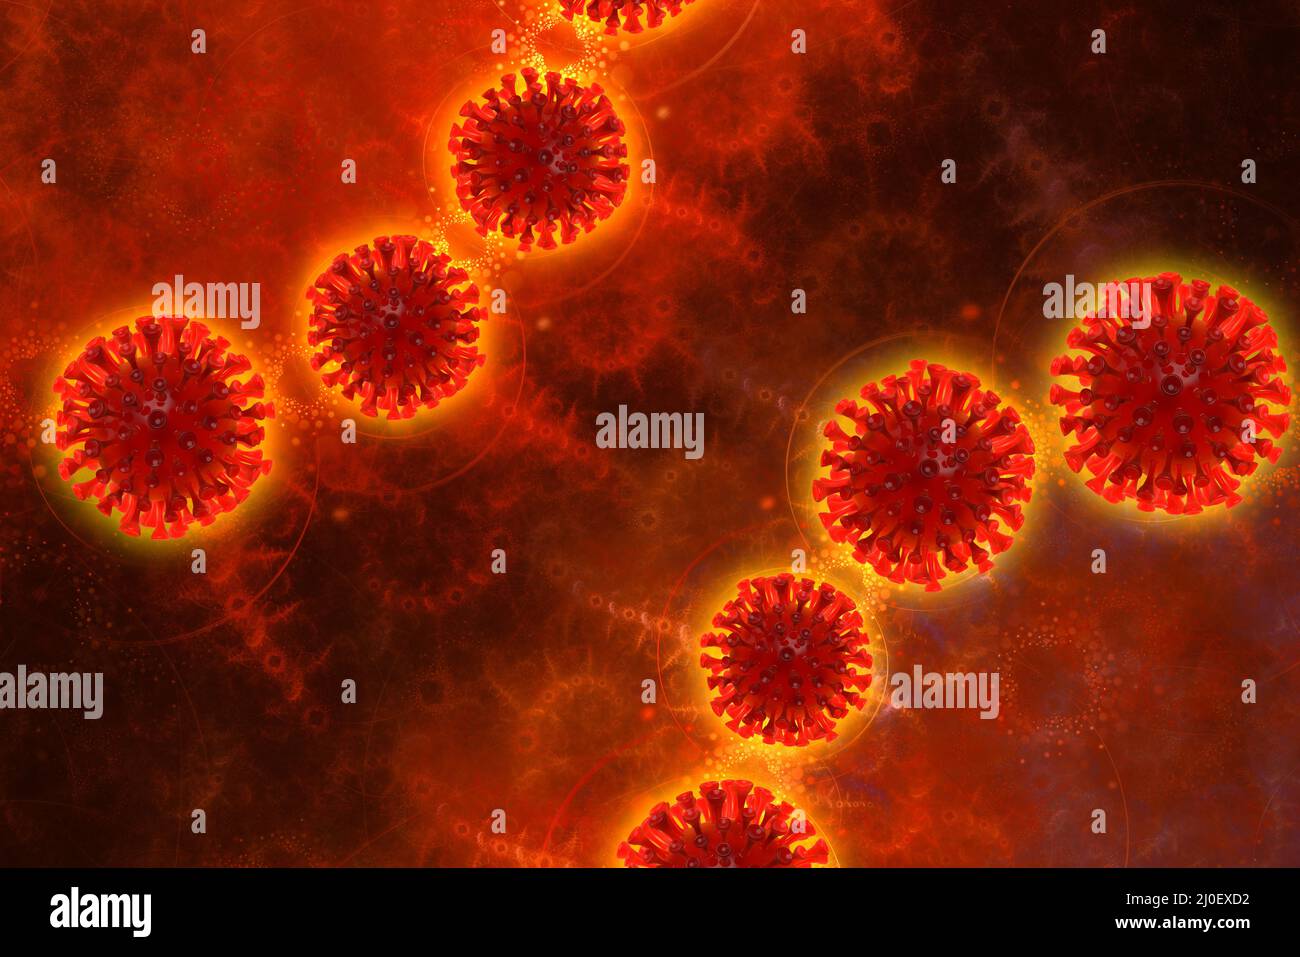 Coronavirus Wuhan, China COVID-19 background with corona cells molecules around. Epidemic condition 3d illustration on red backg Stock Photo